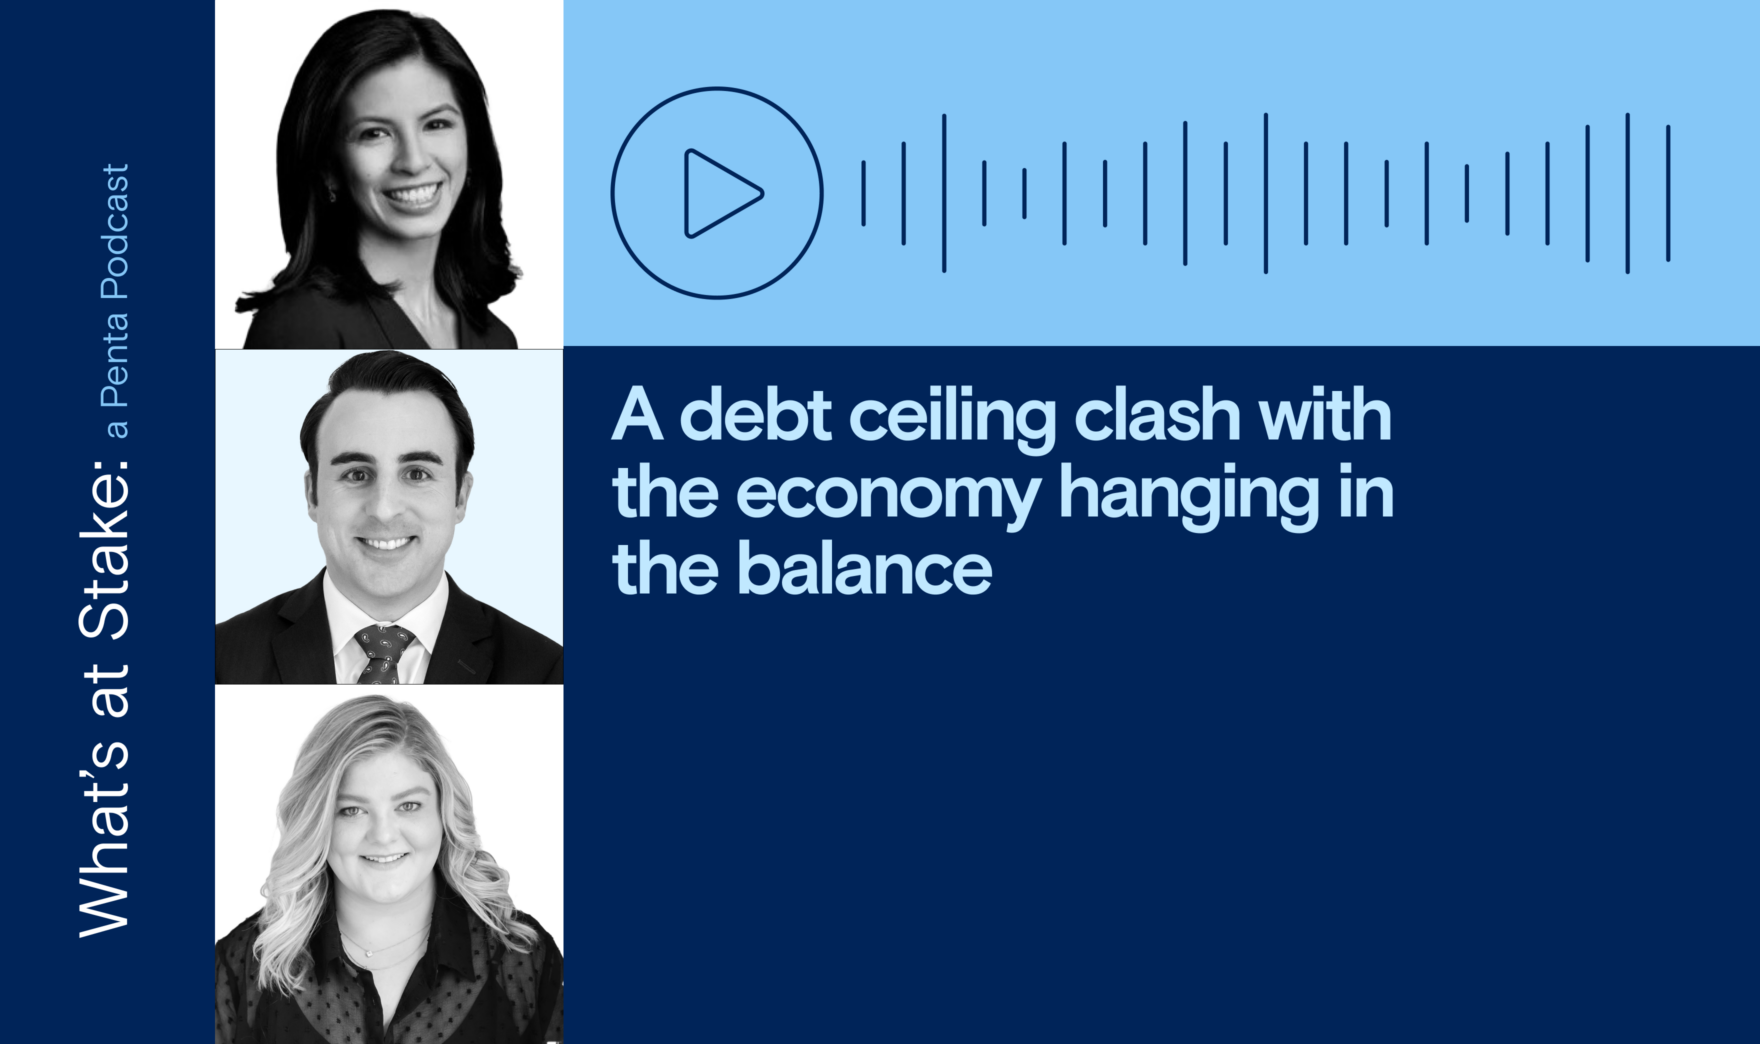 A debt ceiling clash with the economy hanging in the balance